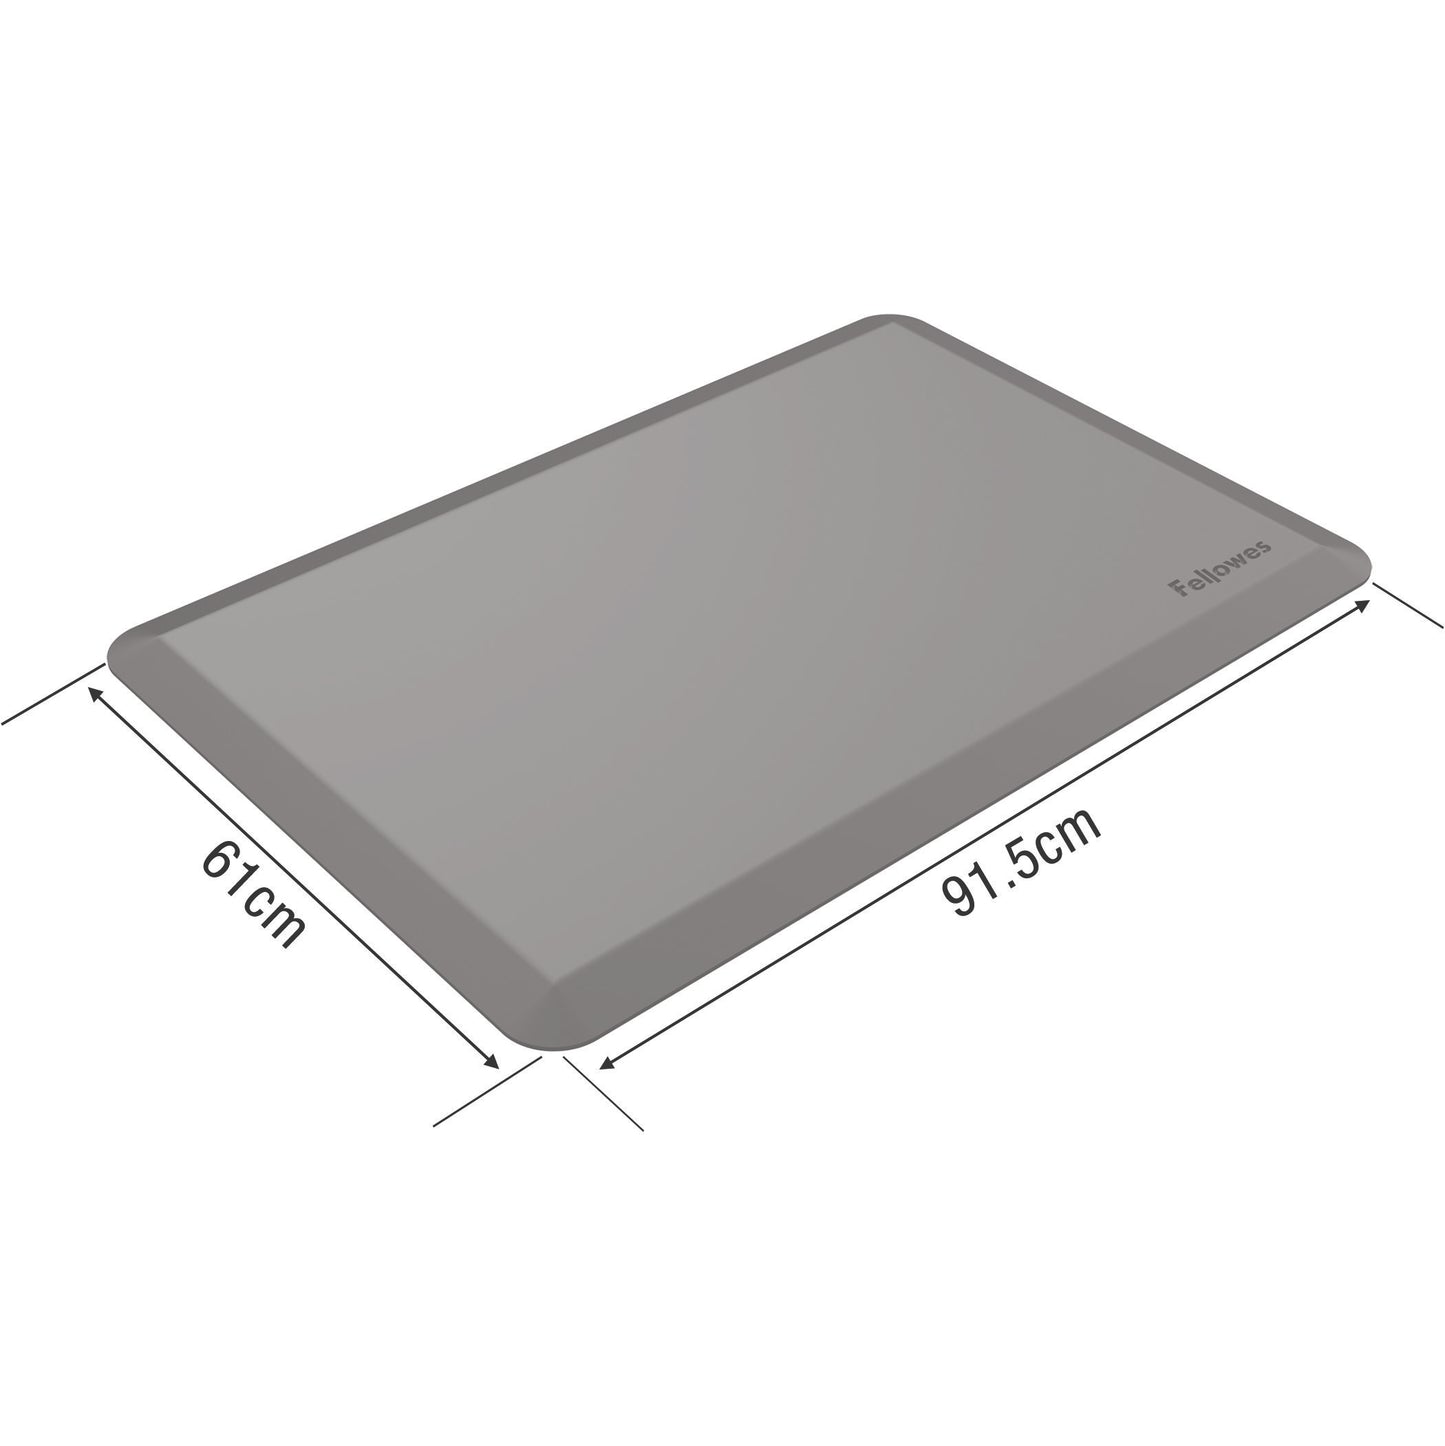 BUY FELLOWES® SIT STAND MAT - EVERYDAY 8707002 with FREE SHIPPING dimensions Affordable and Quality